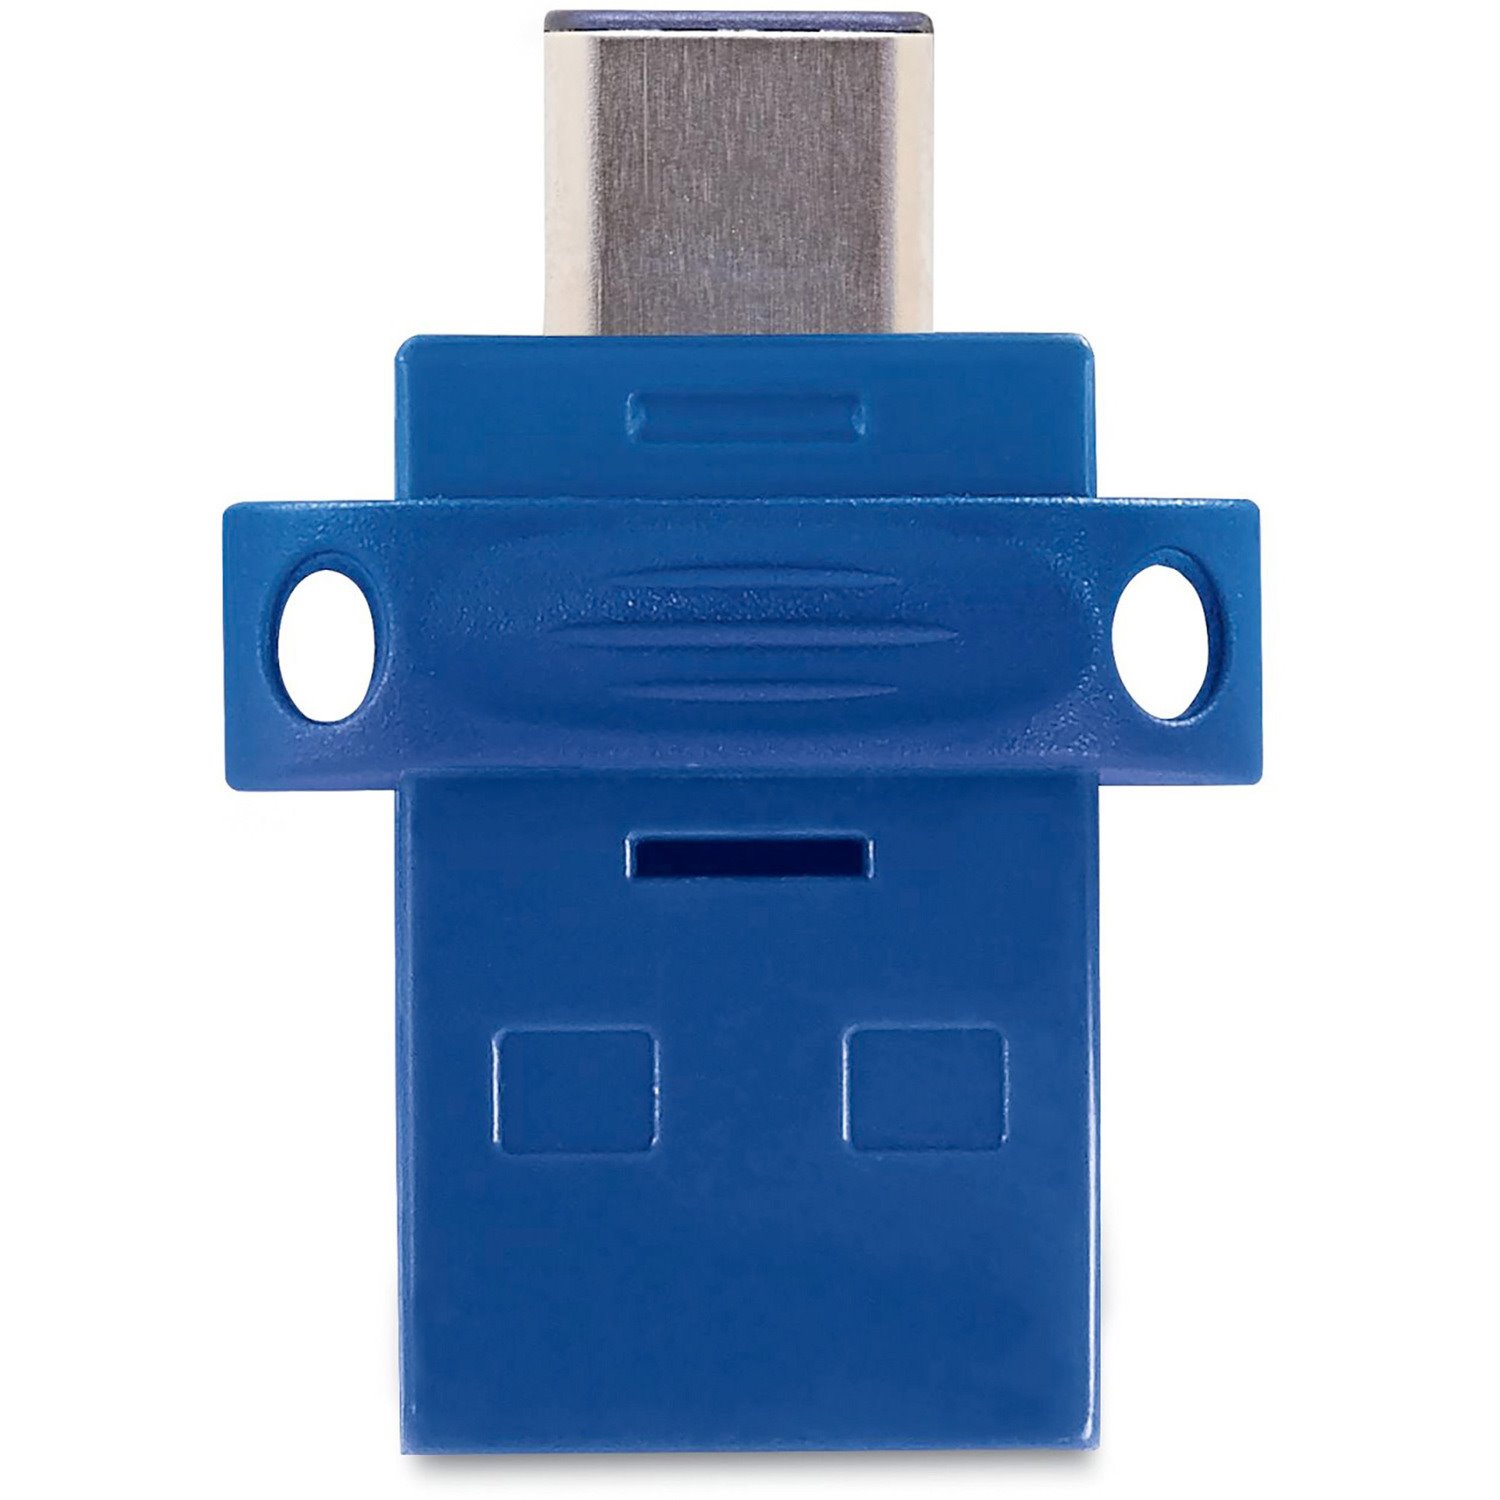 16GB Store 'n' Go Dual USB 3.2 Gen 1 Flash Drive for USB-C&trade; Devices - Blue